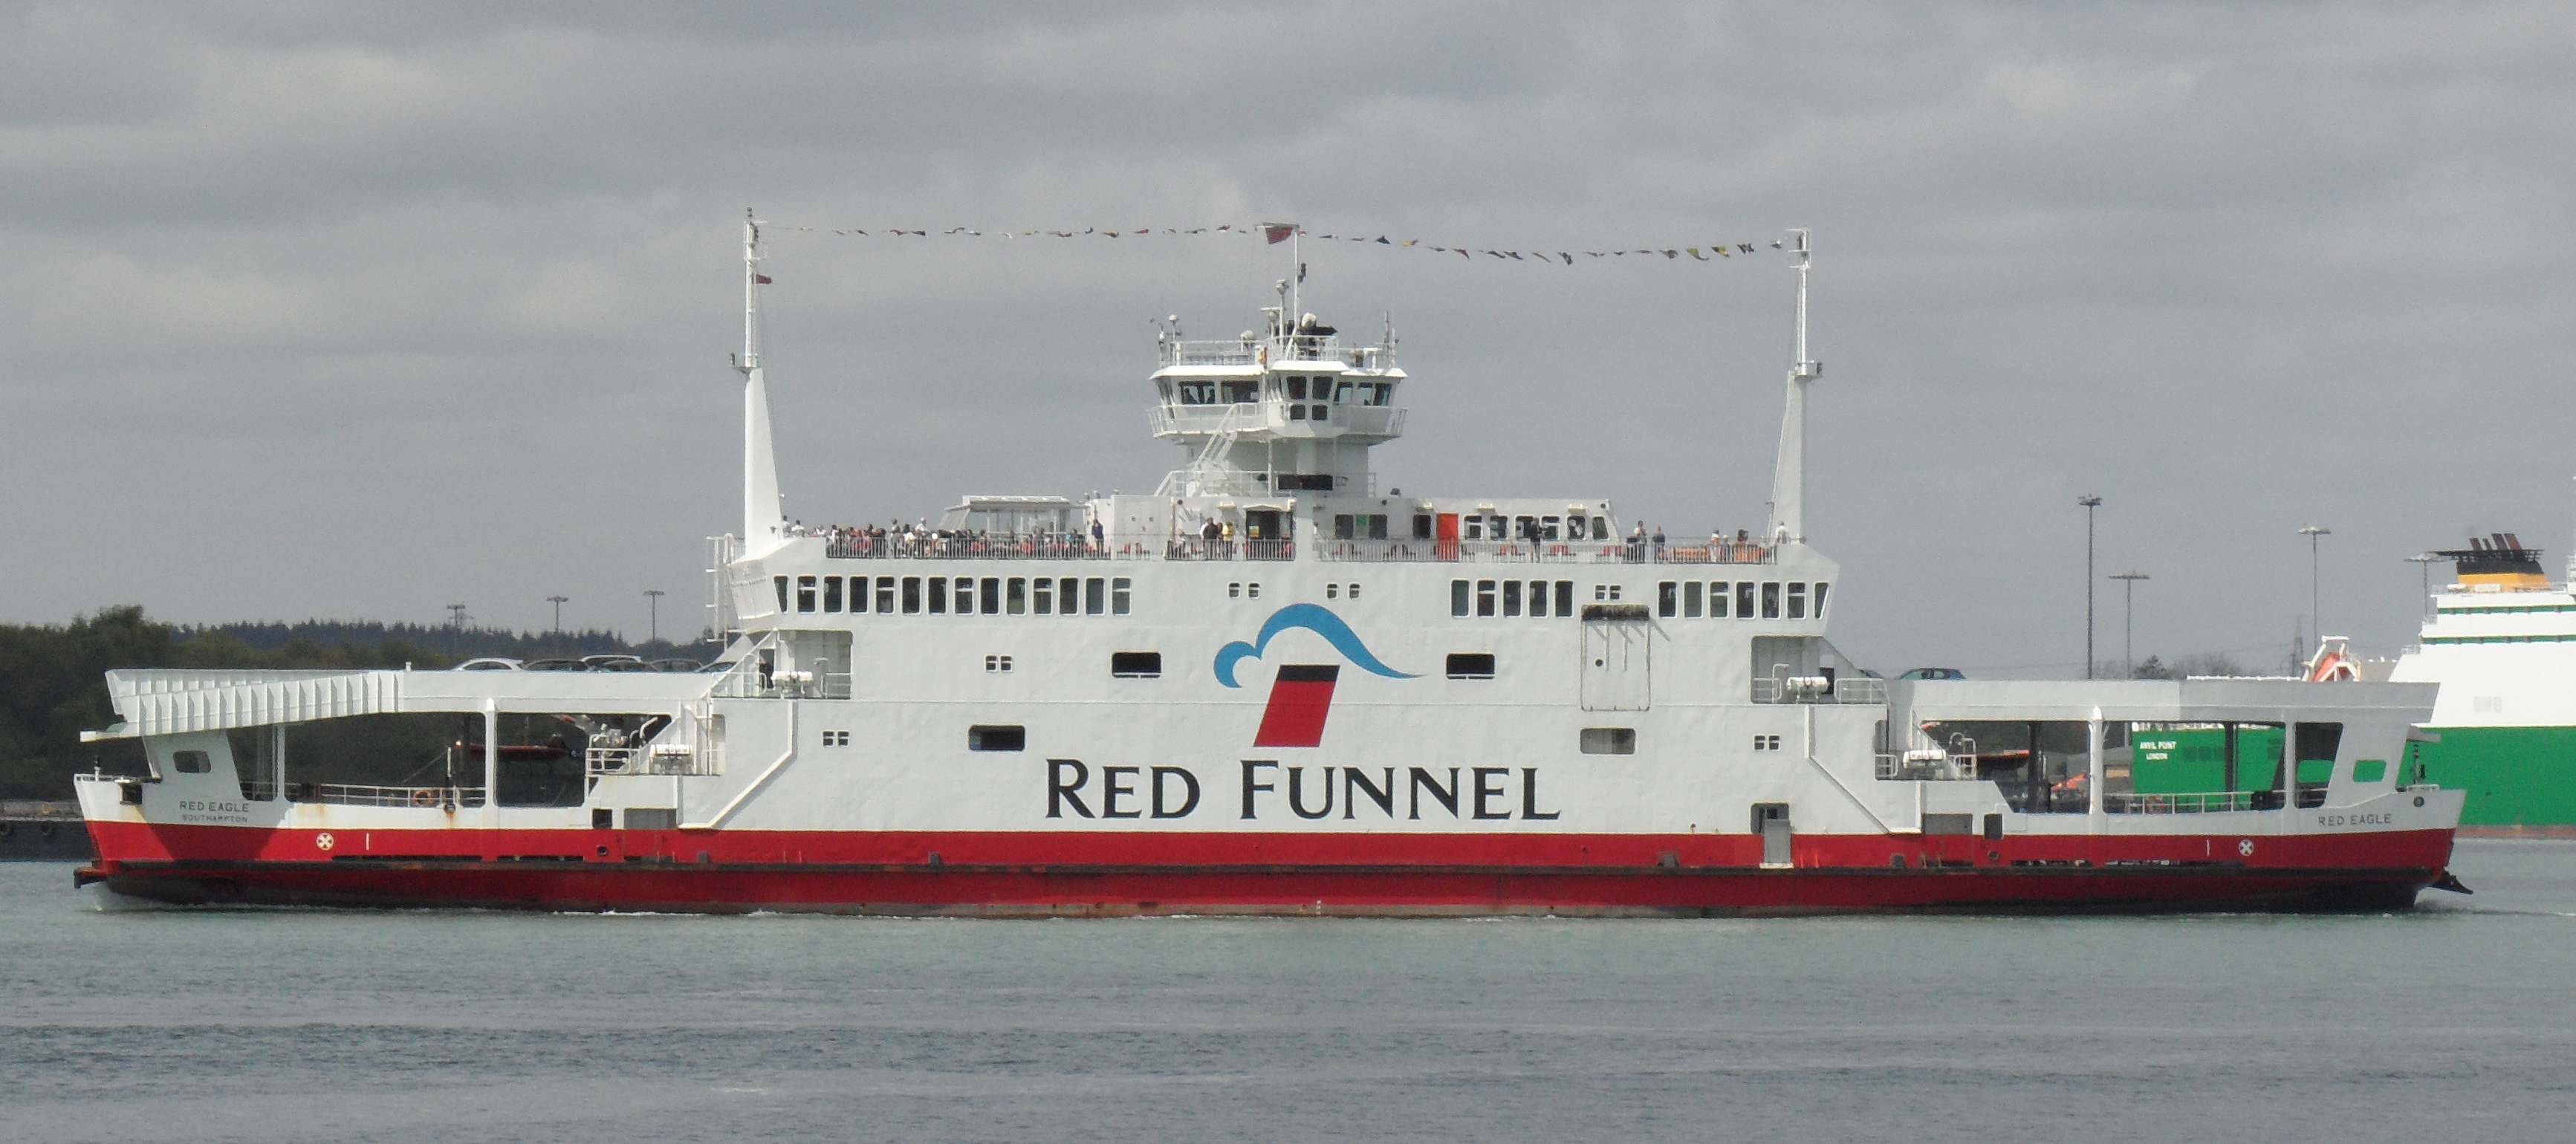 Red funnel ferry photo